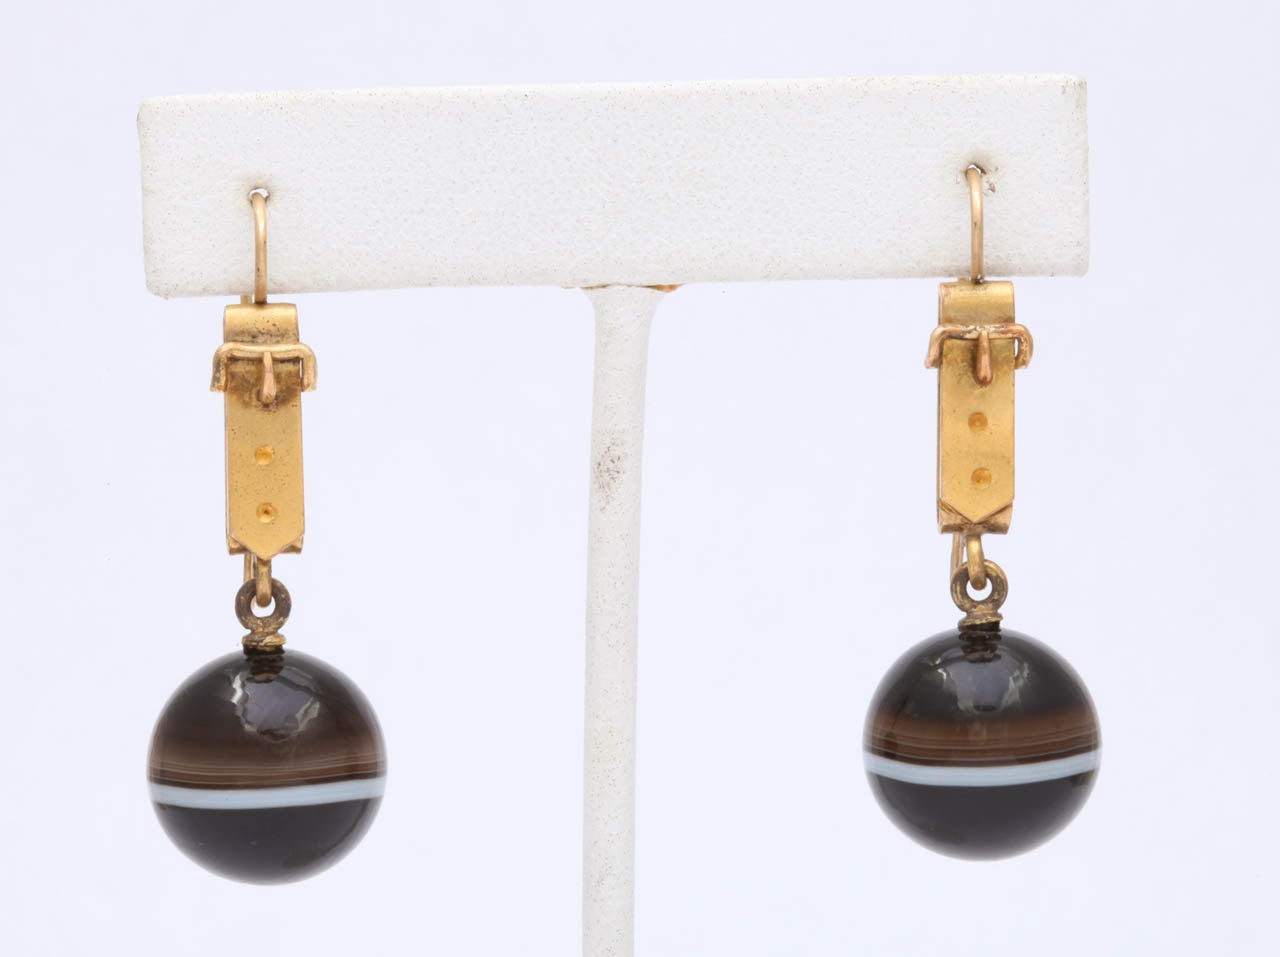 One of the many design characteristics in 1870 Great Britain was whimsy and humor, both of which are present in these belted banded agate earrings. A buckle on the ears or wrist, a corset on a bracelet, bangles that appear to be shirt cuffs with